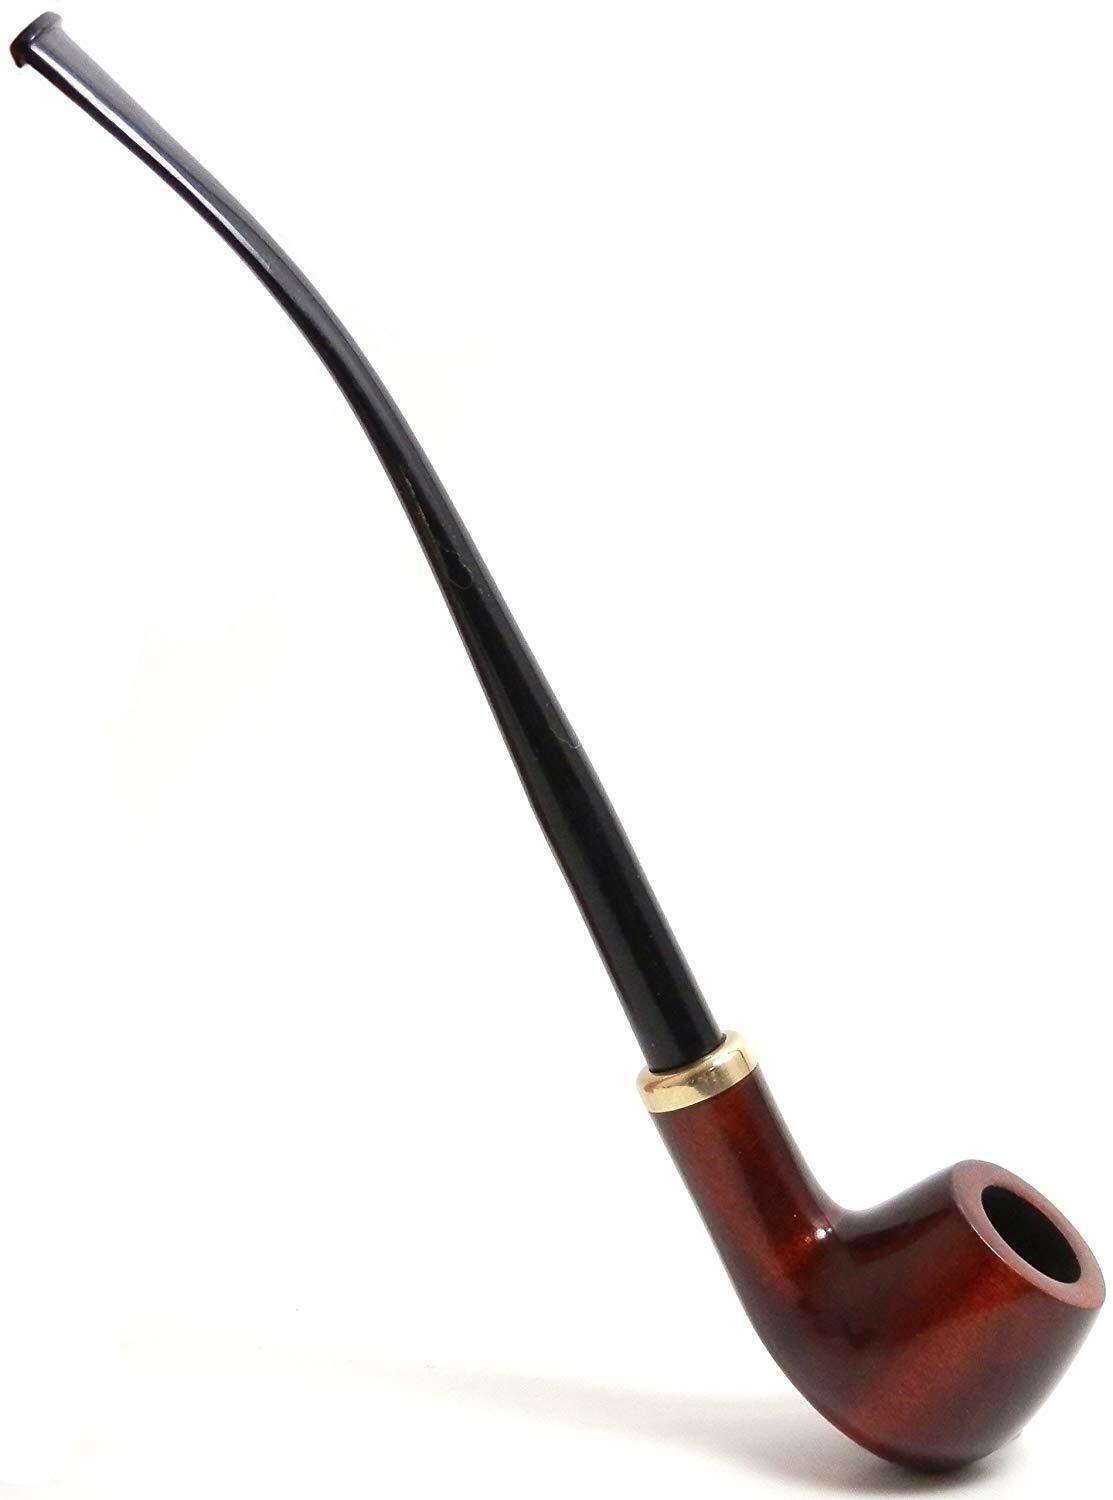 Churchwarden long cherry color smooth pear tree tobacco smoking pipe by Mr. Brog